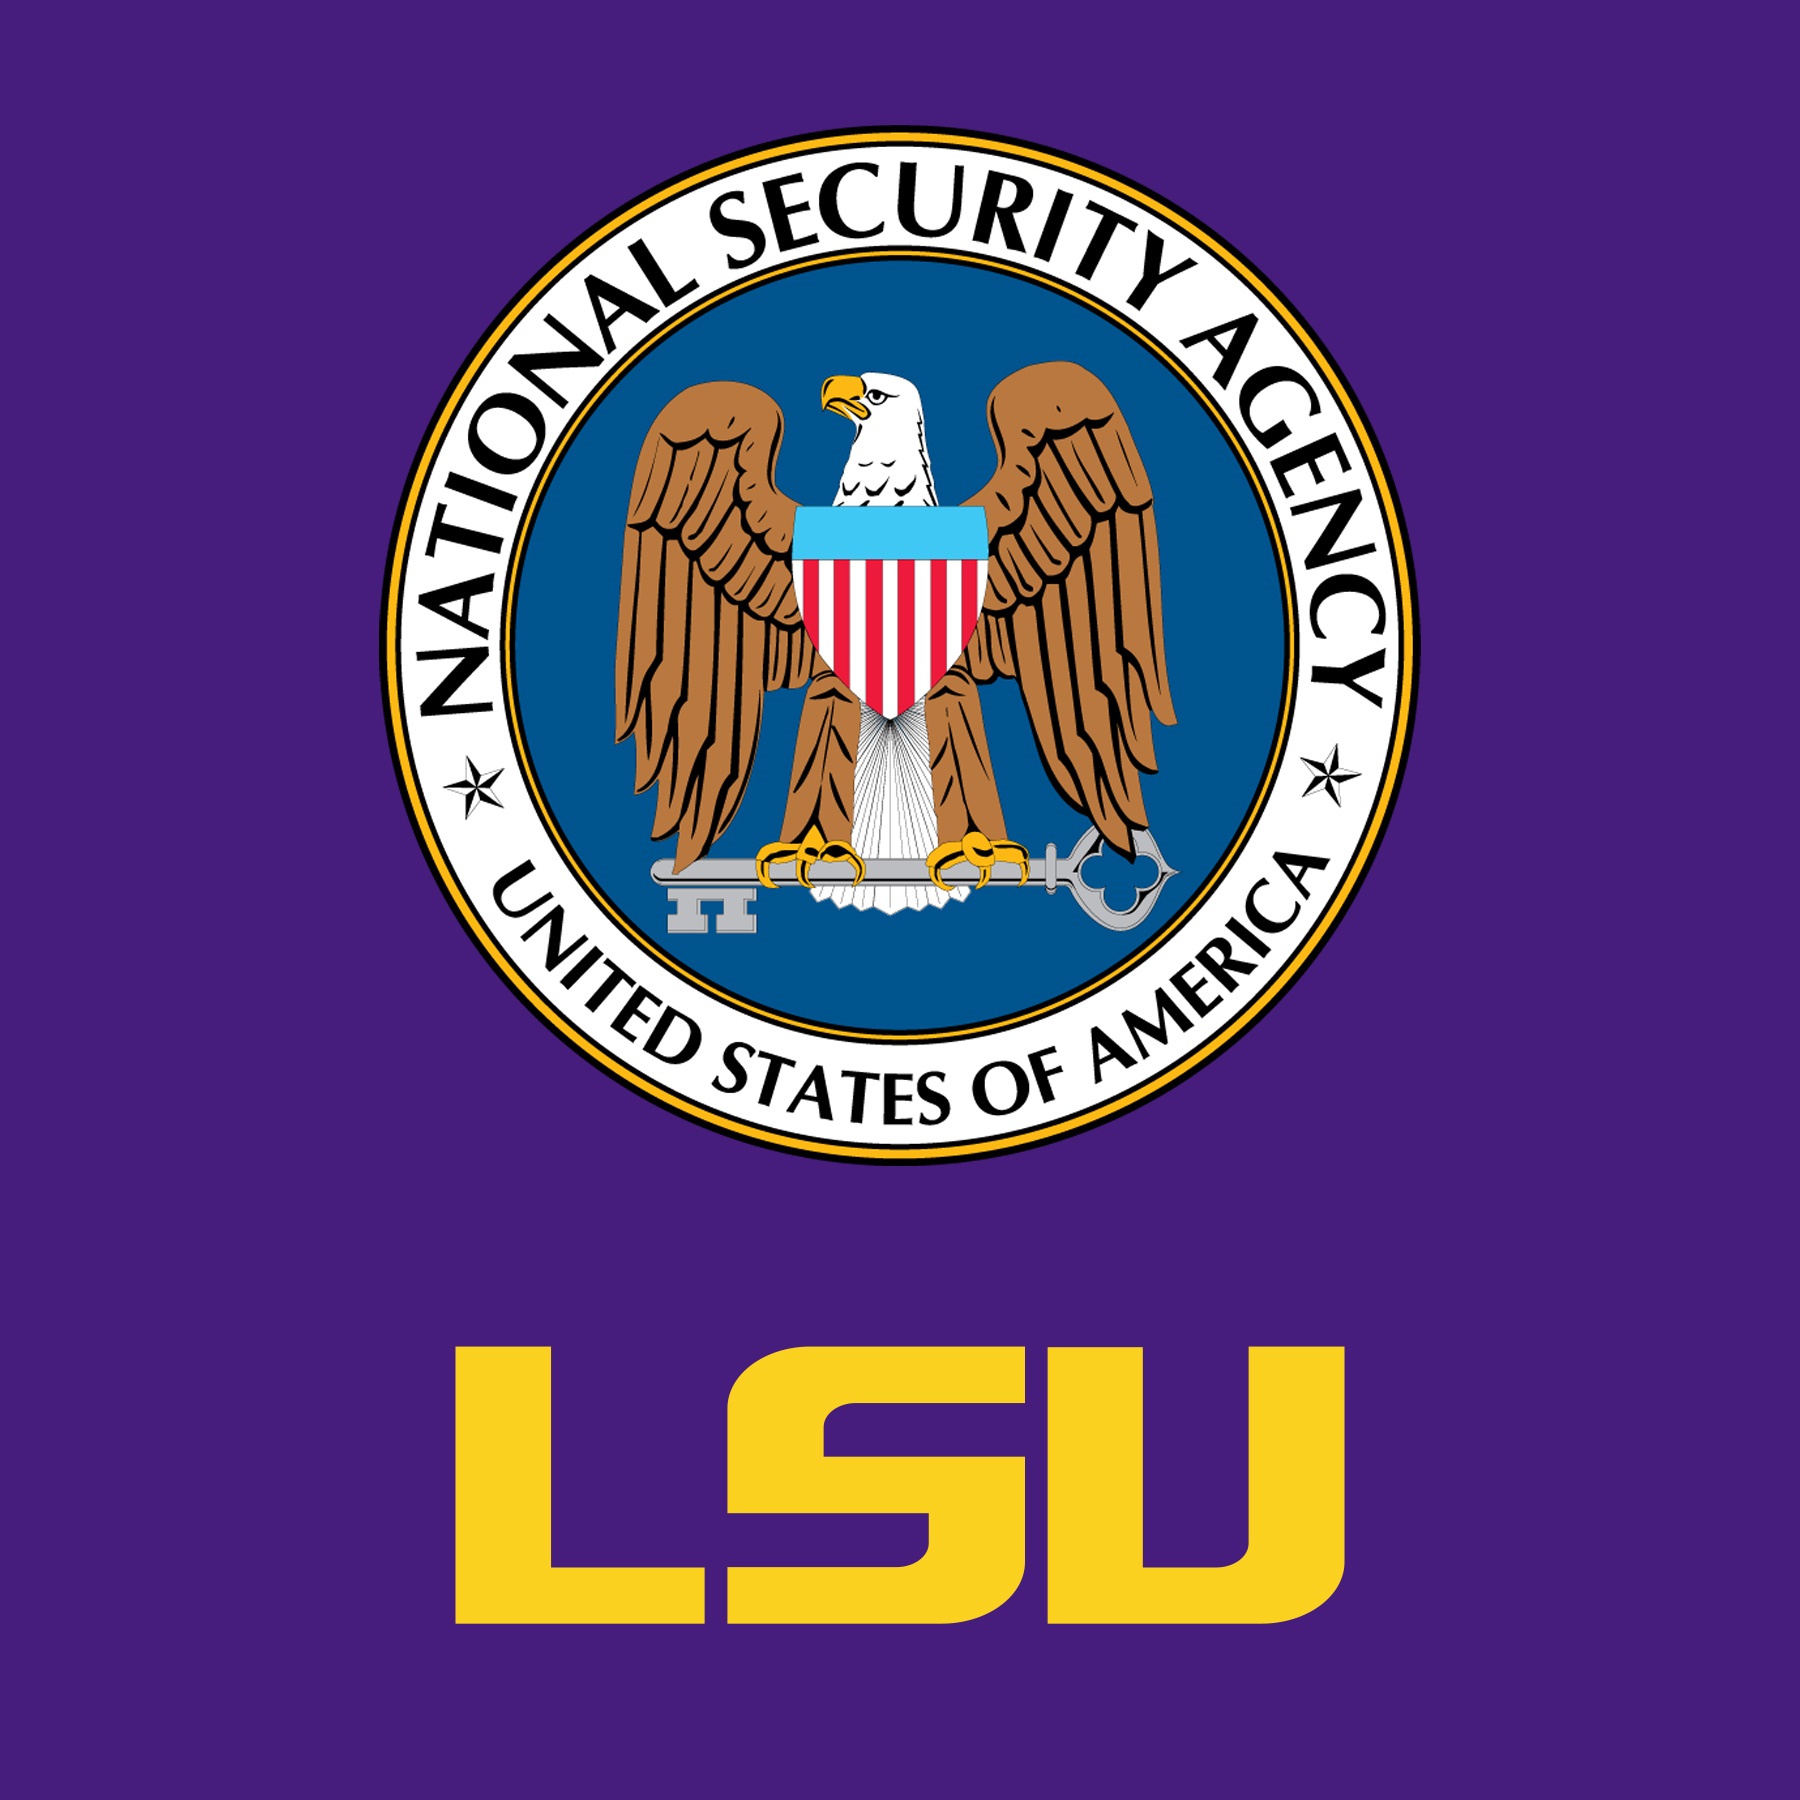 LSU has been designated by the National Security Agency as a Center of Academic Excellence in Cyber Operations.